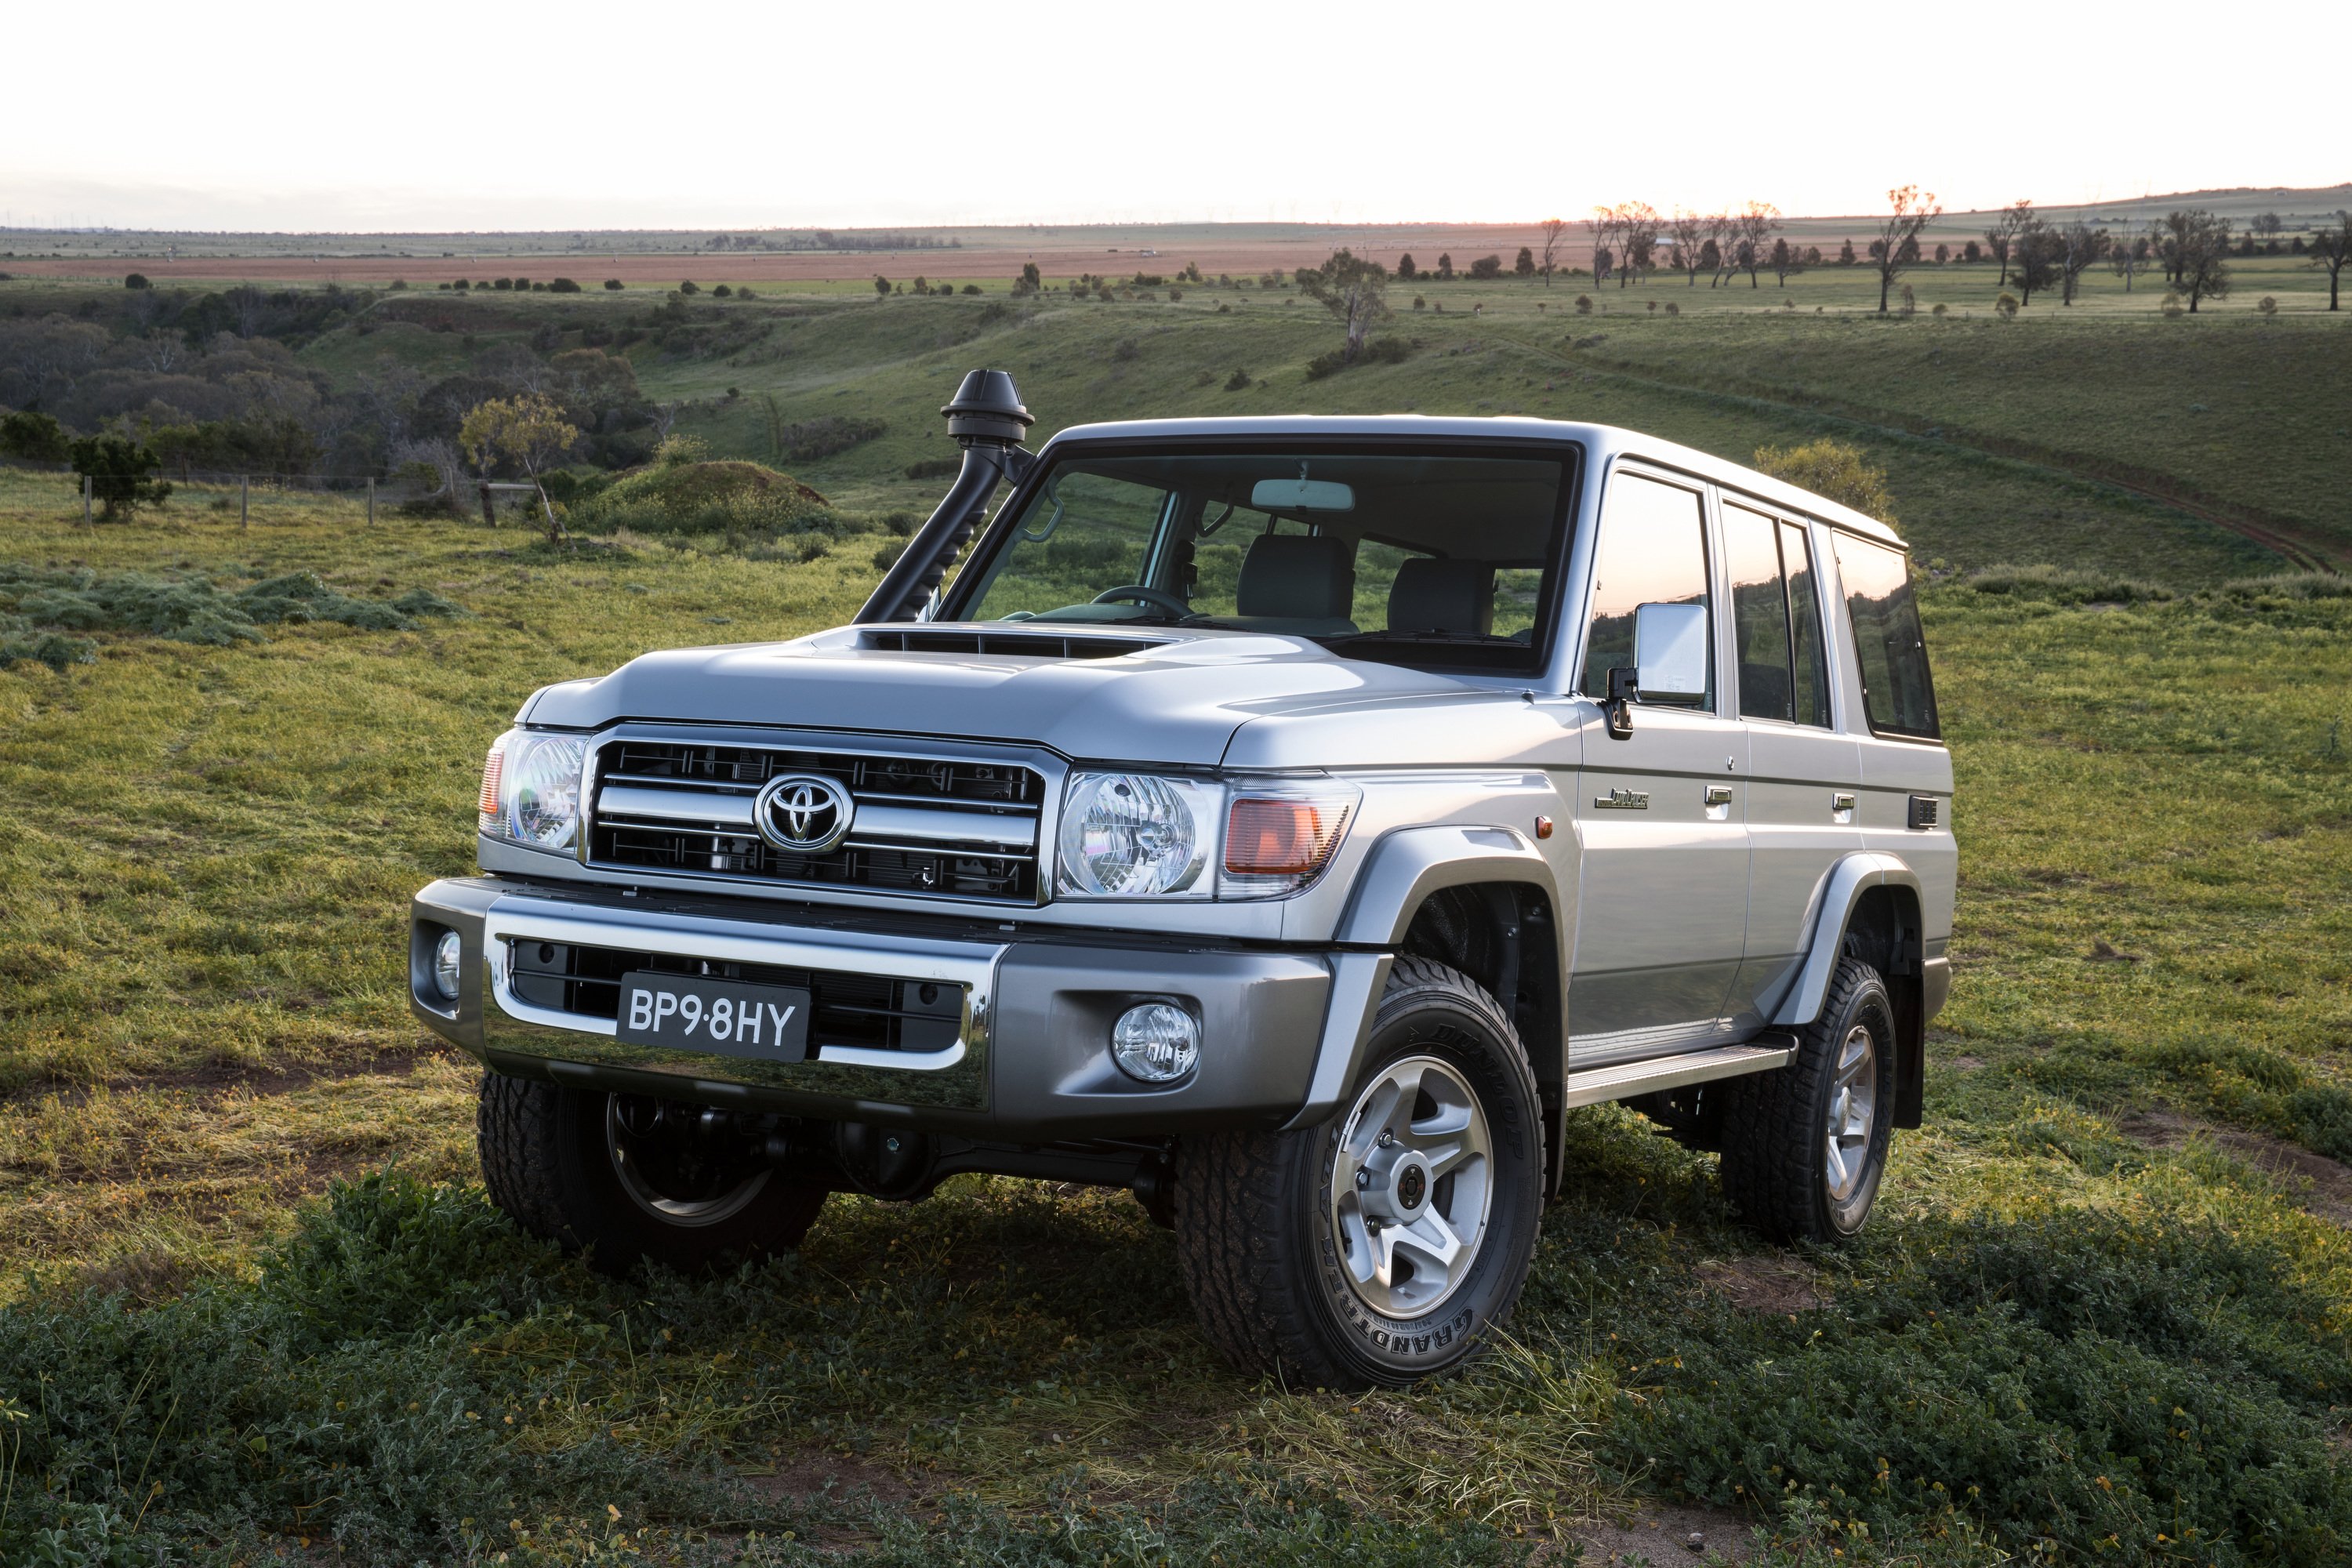 2017 Toyota LandCruiser 70 Series pricing and specs